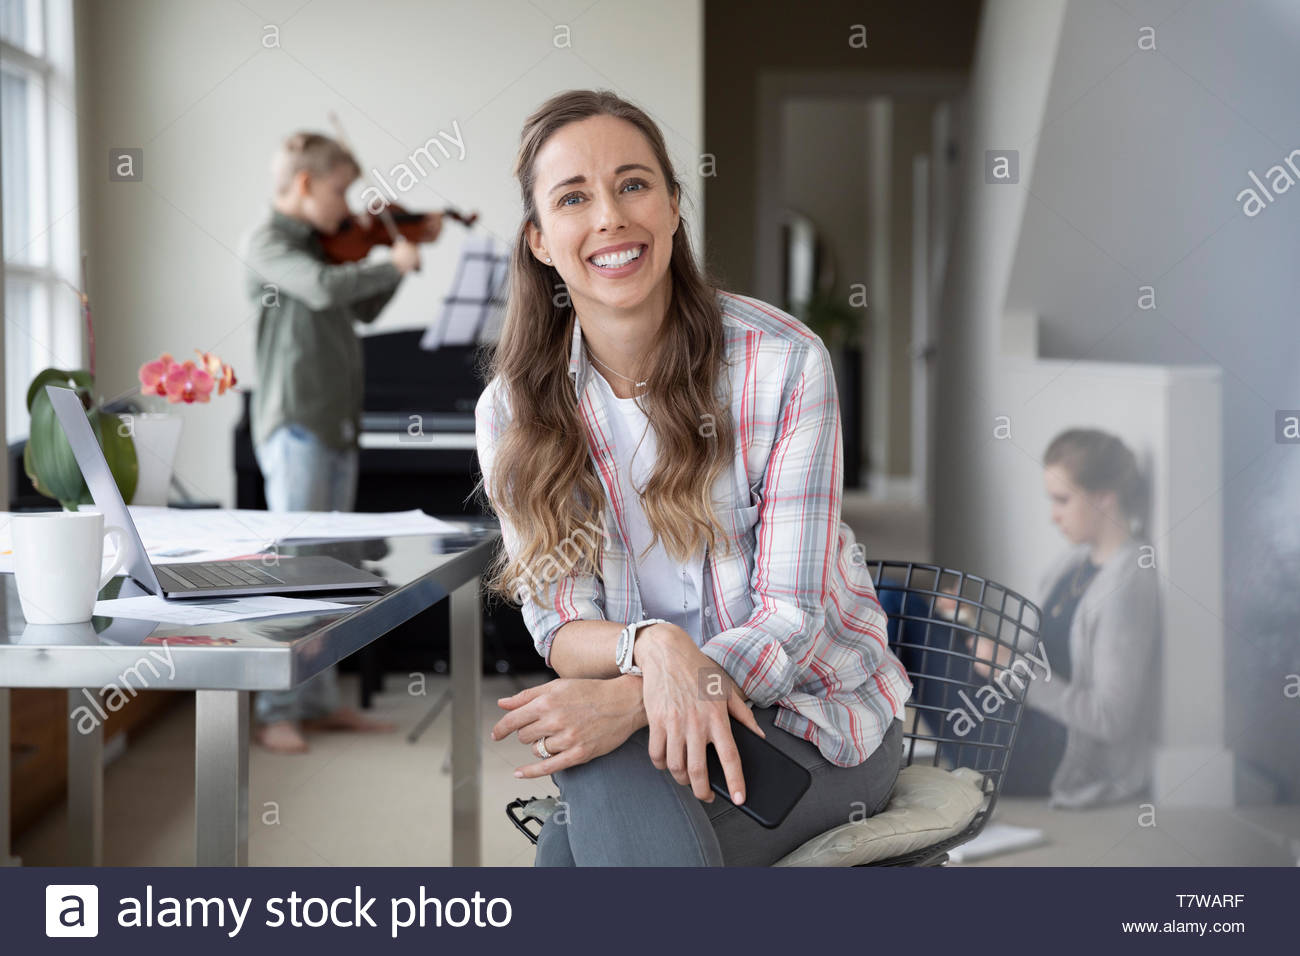 Portrait confident, happy mother working from home while children do homework and practice violin in background Stock Photo